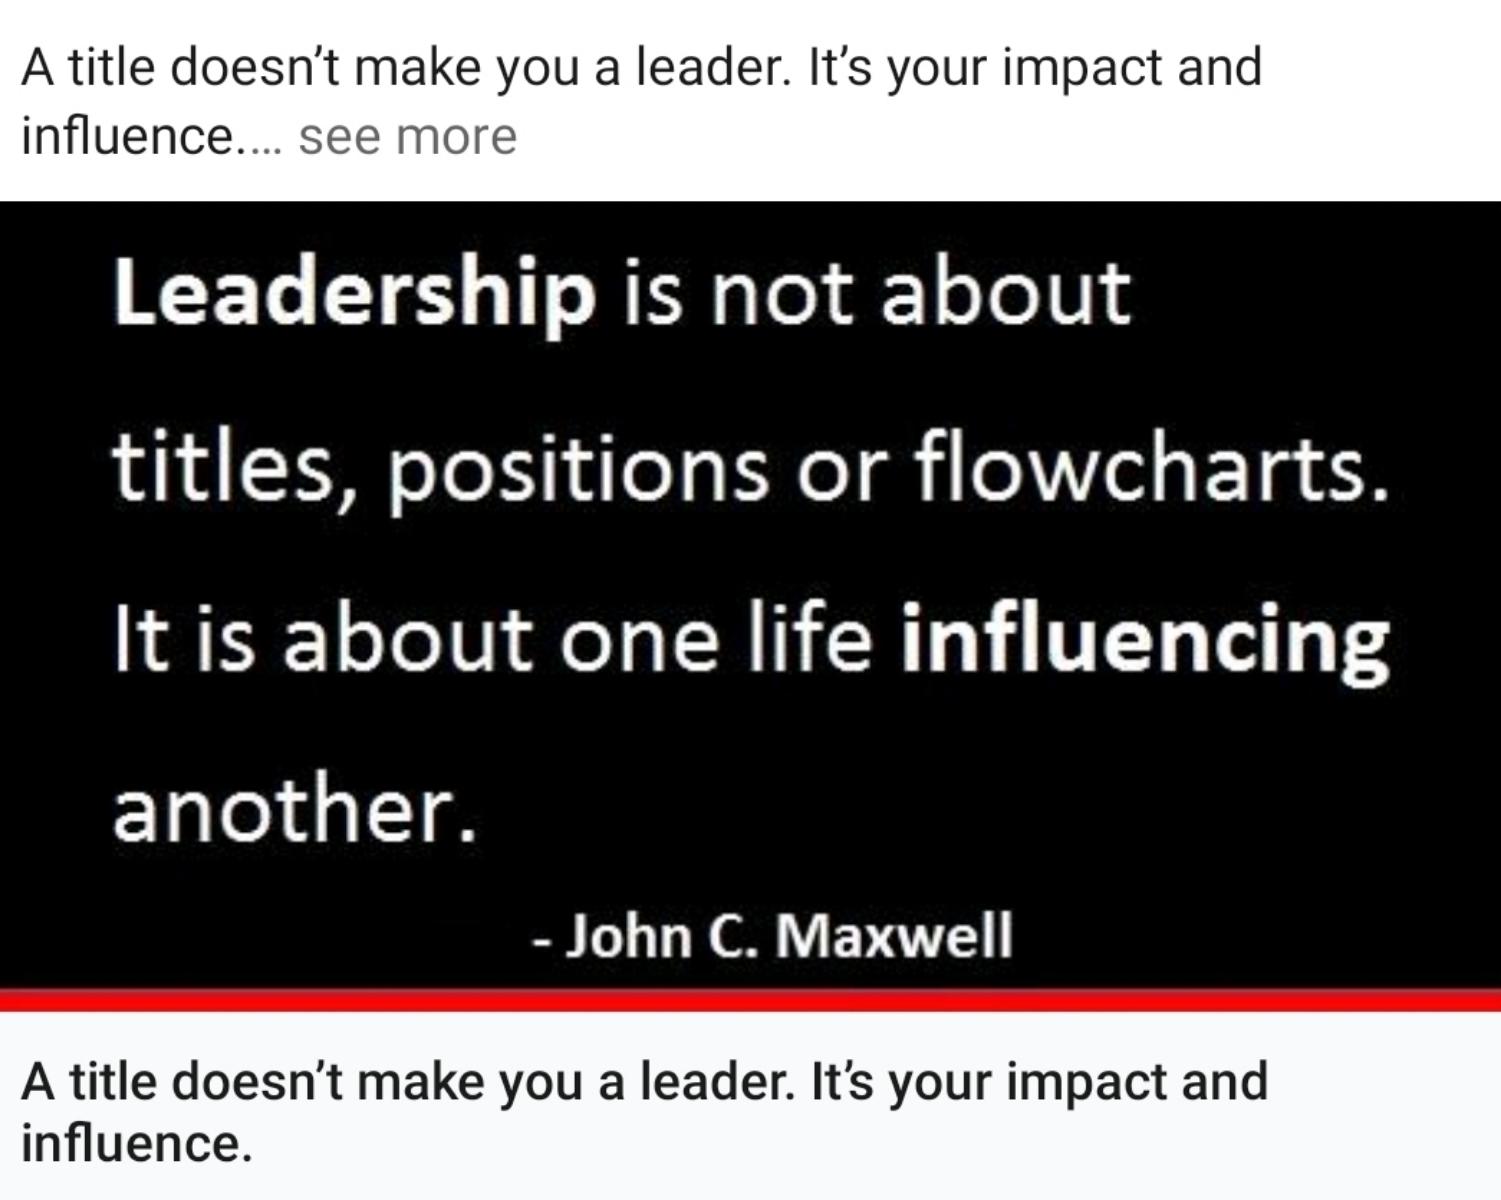 A LEADER IS.....